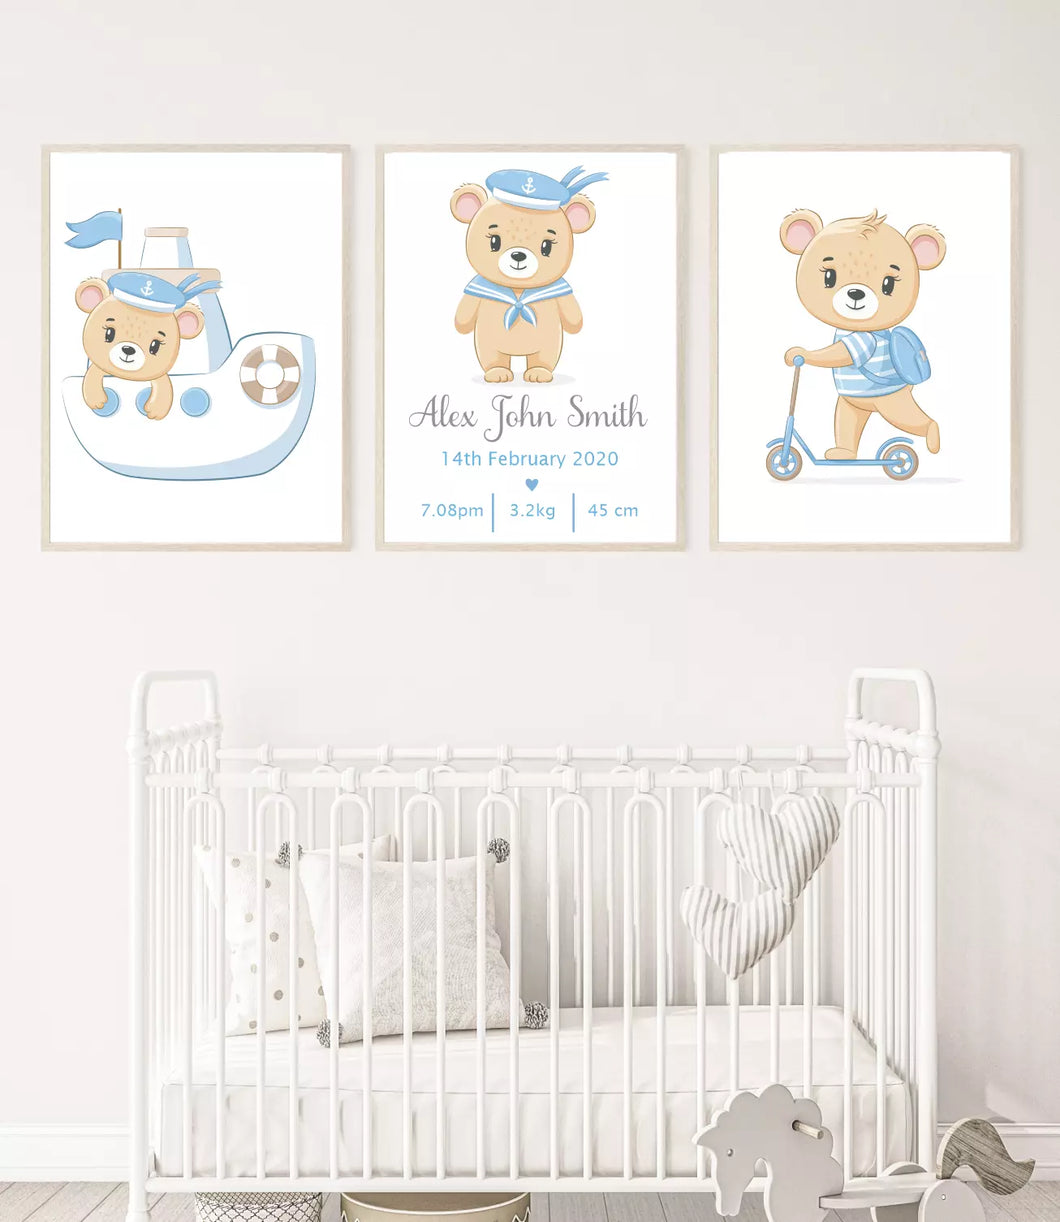 Set of 3 Cute Teddy Bears Dressed in Blue, with Birth Stats Wall Art Poster Prints, Various Sizes Available